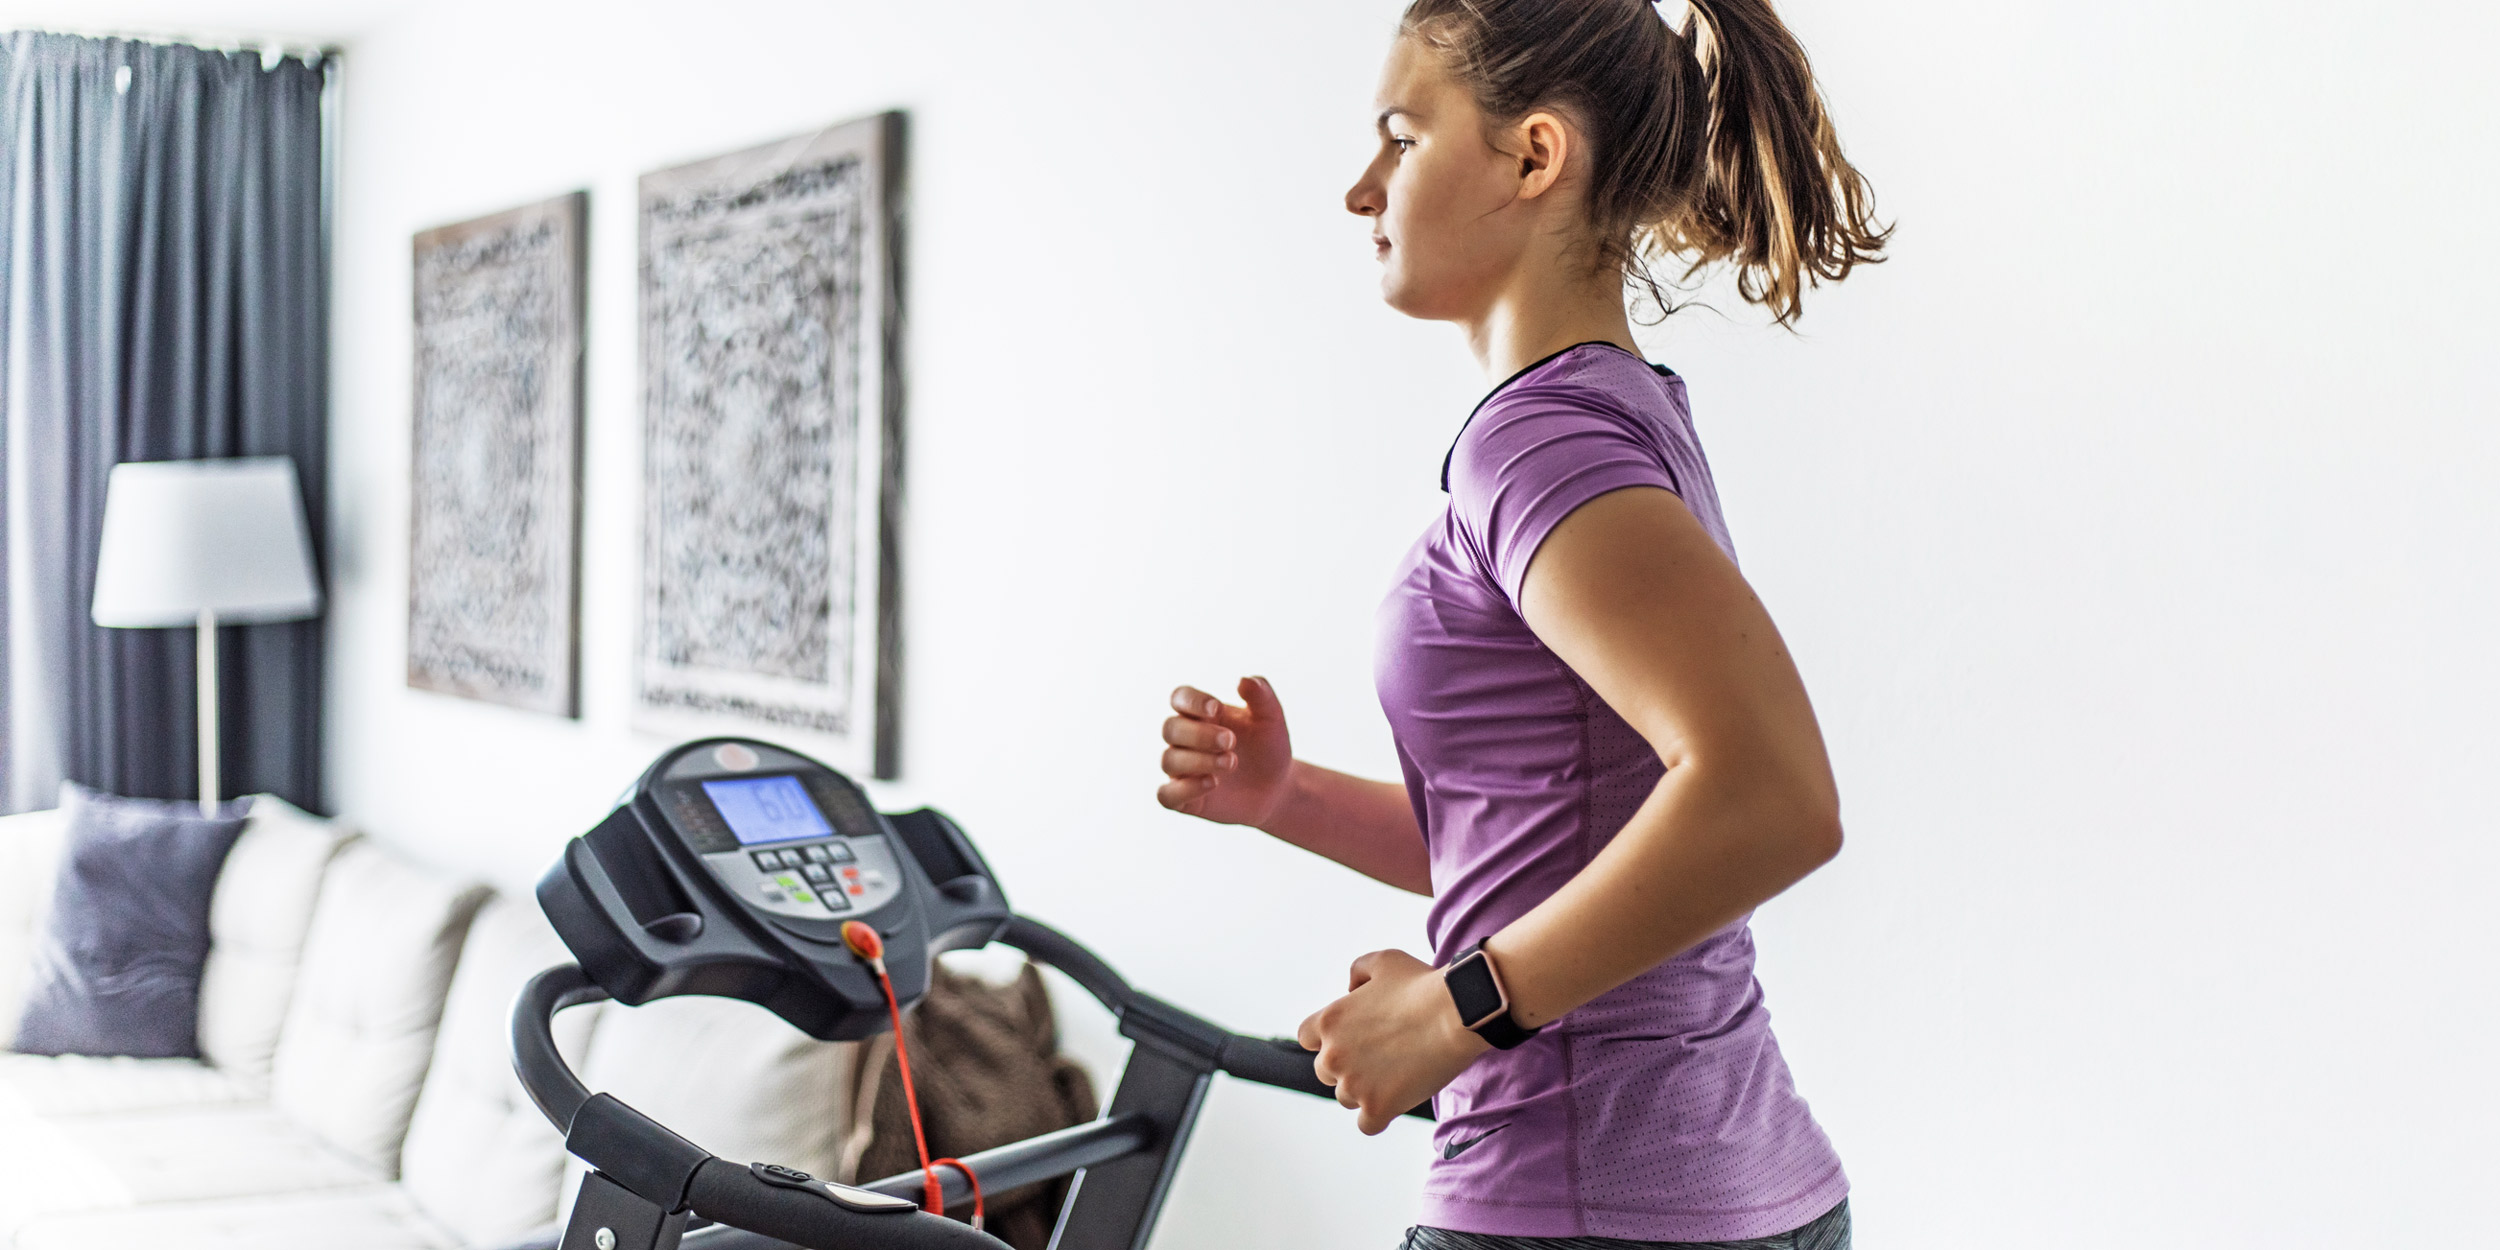 Improve Your Cardio With The Right Training Equipment